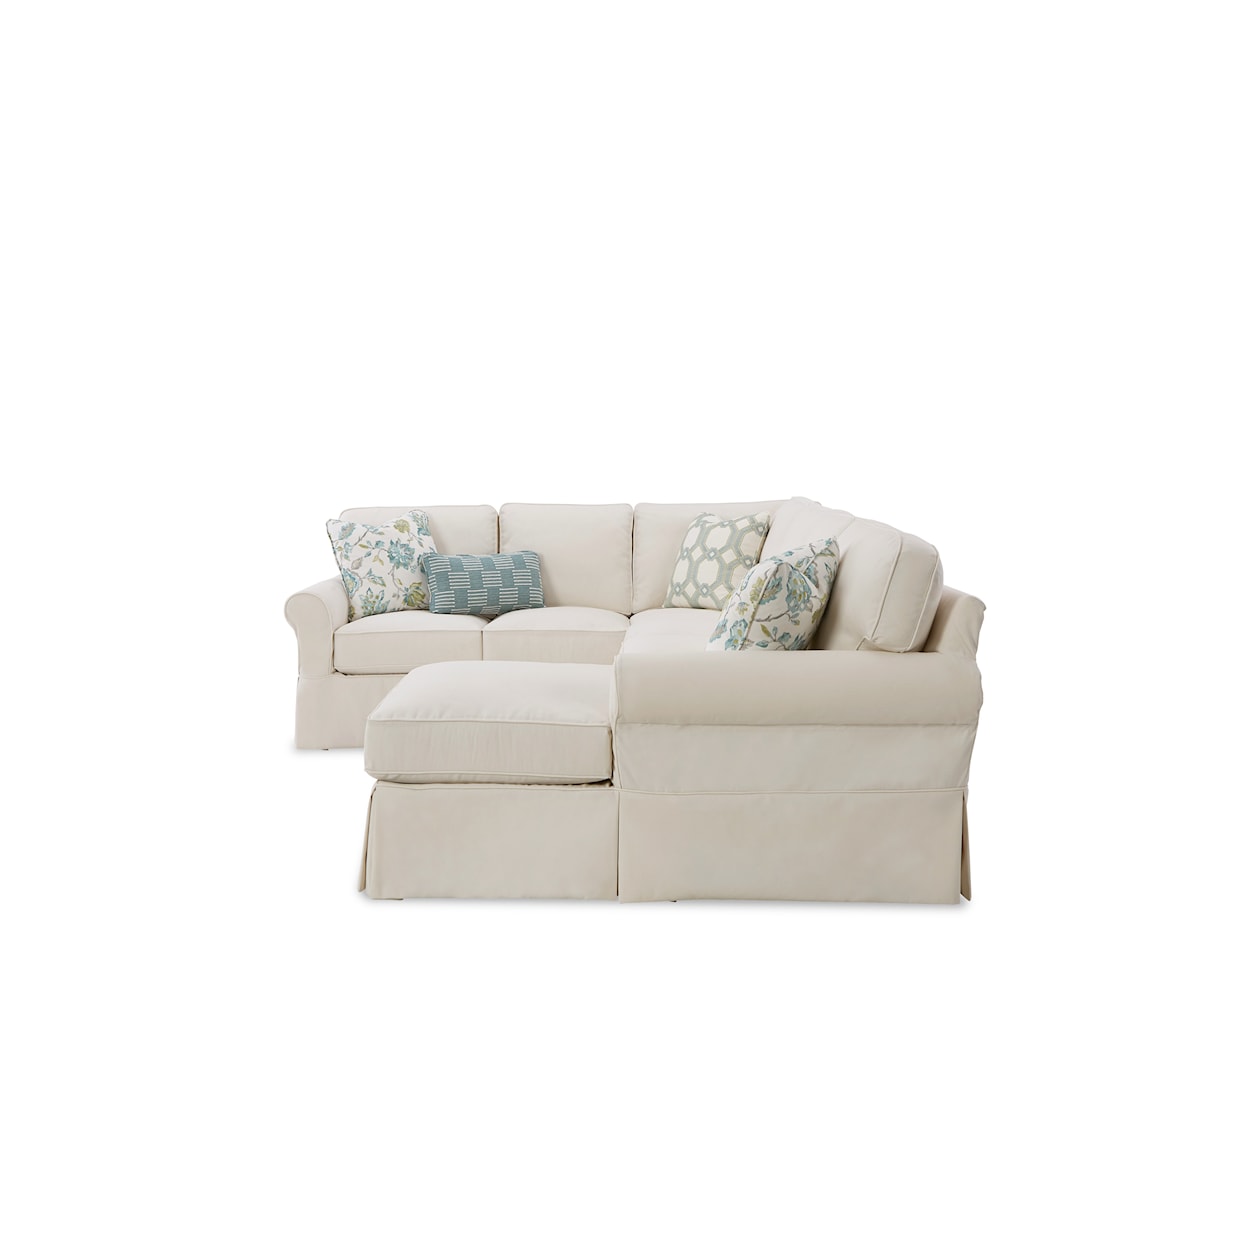 Craftmaster Alyssa 3-Pc Slipcover Sectional Sofa w/ RAF Chaise